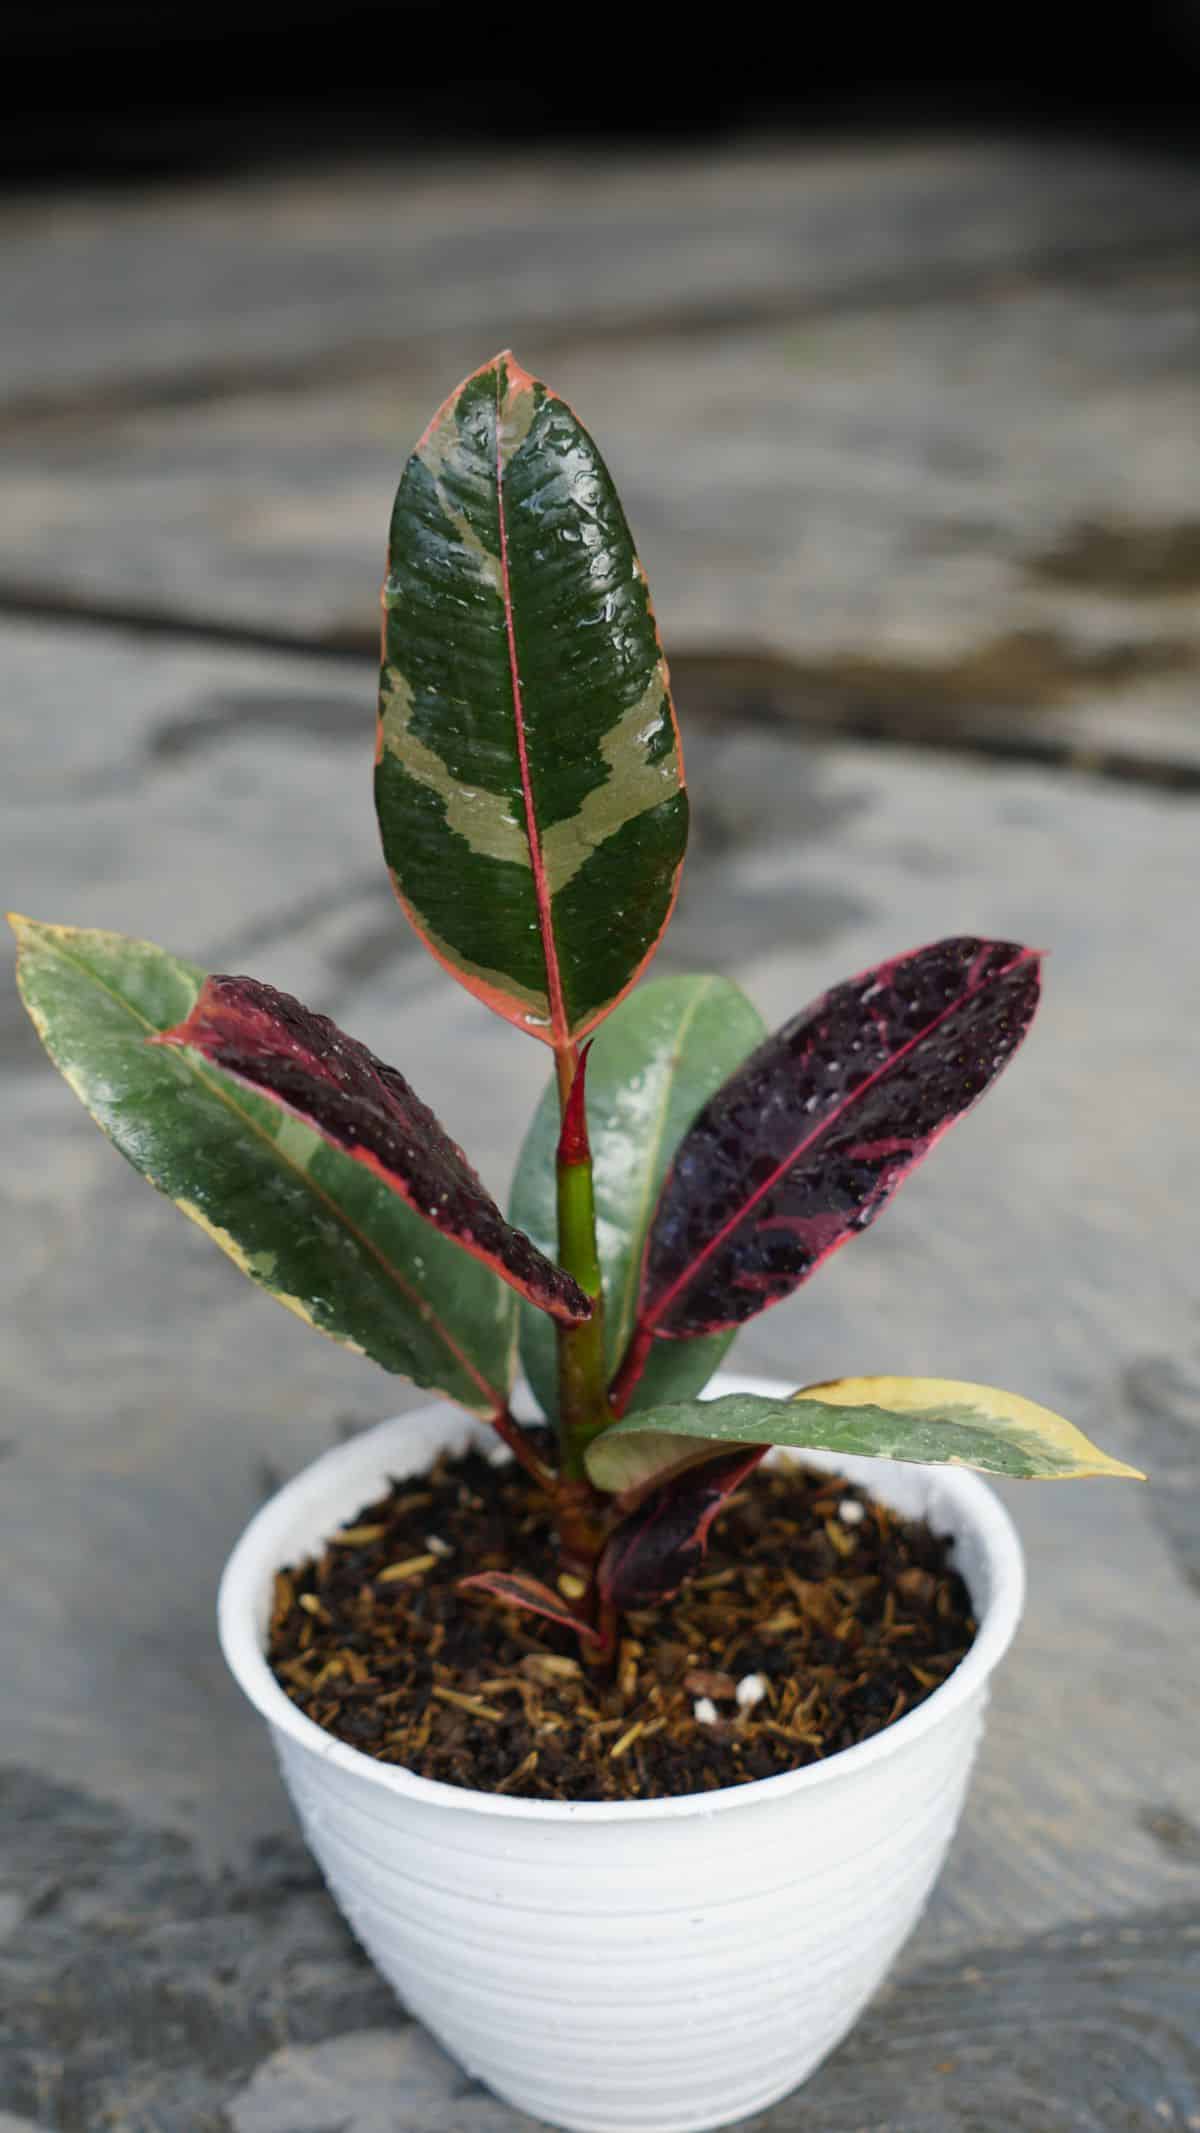 Ruby Rubber Tree growing in a white pot.